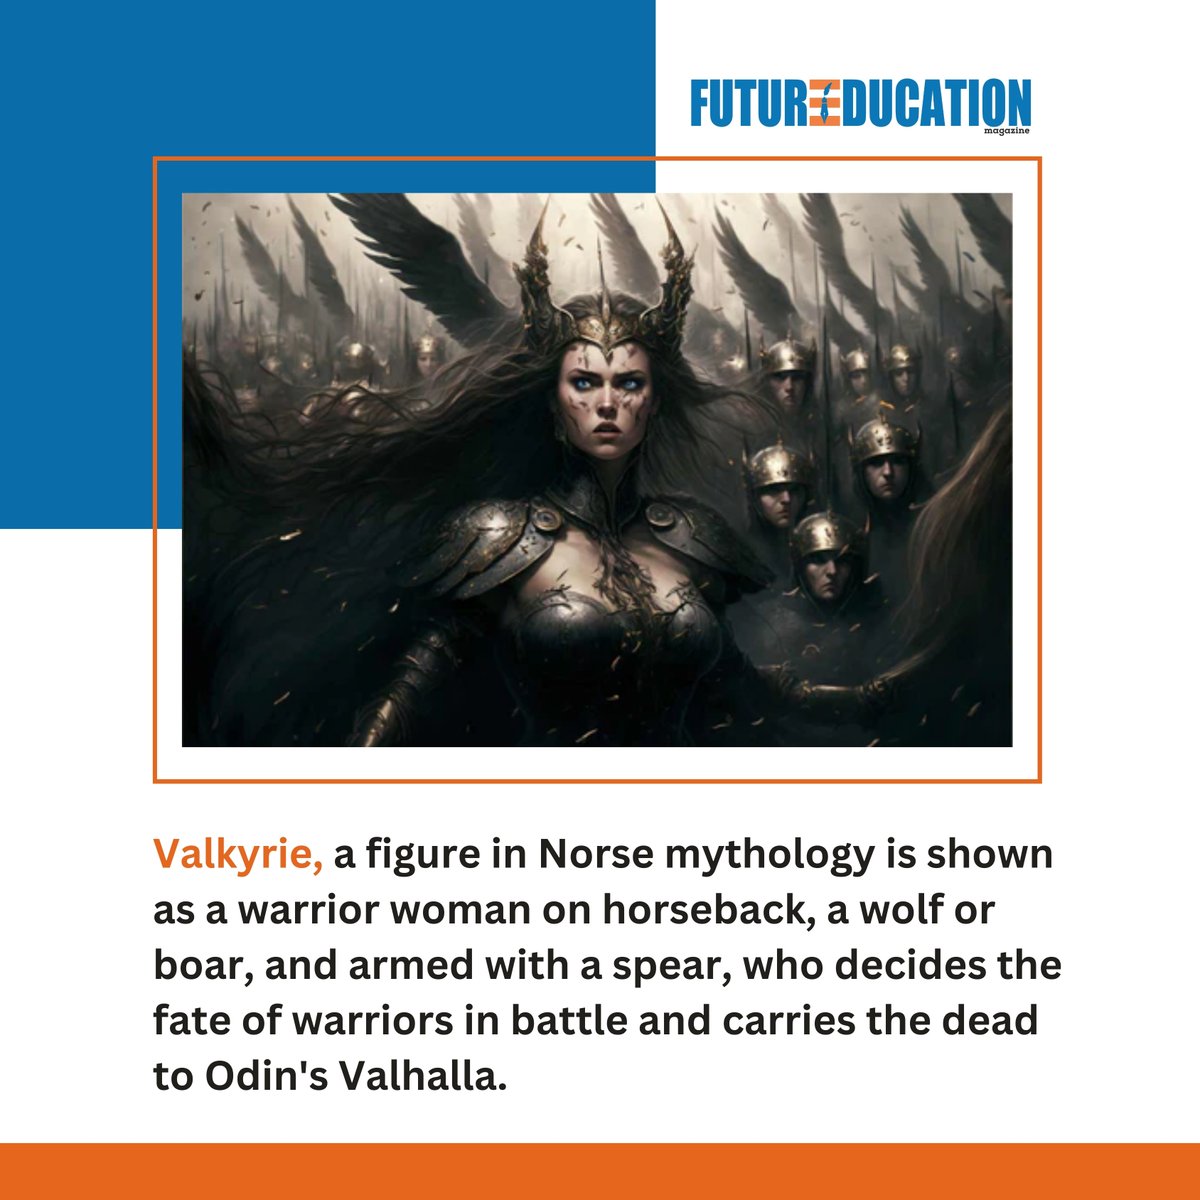 Meet the Valkyrie: Mythical warriors of Norse legend. Riding fierce steeds and armed with spears, they decide the fate of fallen warriors and carry them to Odin's Valhalla.

Follow For More Future Education Magazine

#ValkyrieLegends #NorseMythology #WarriorWomen